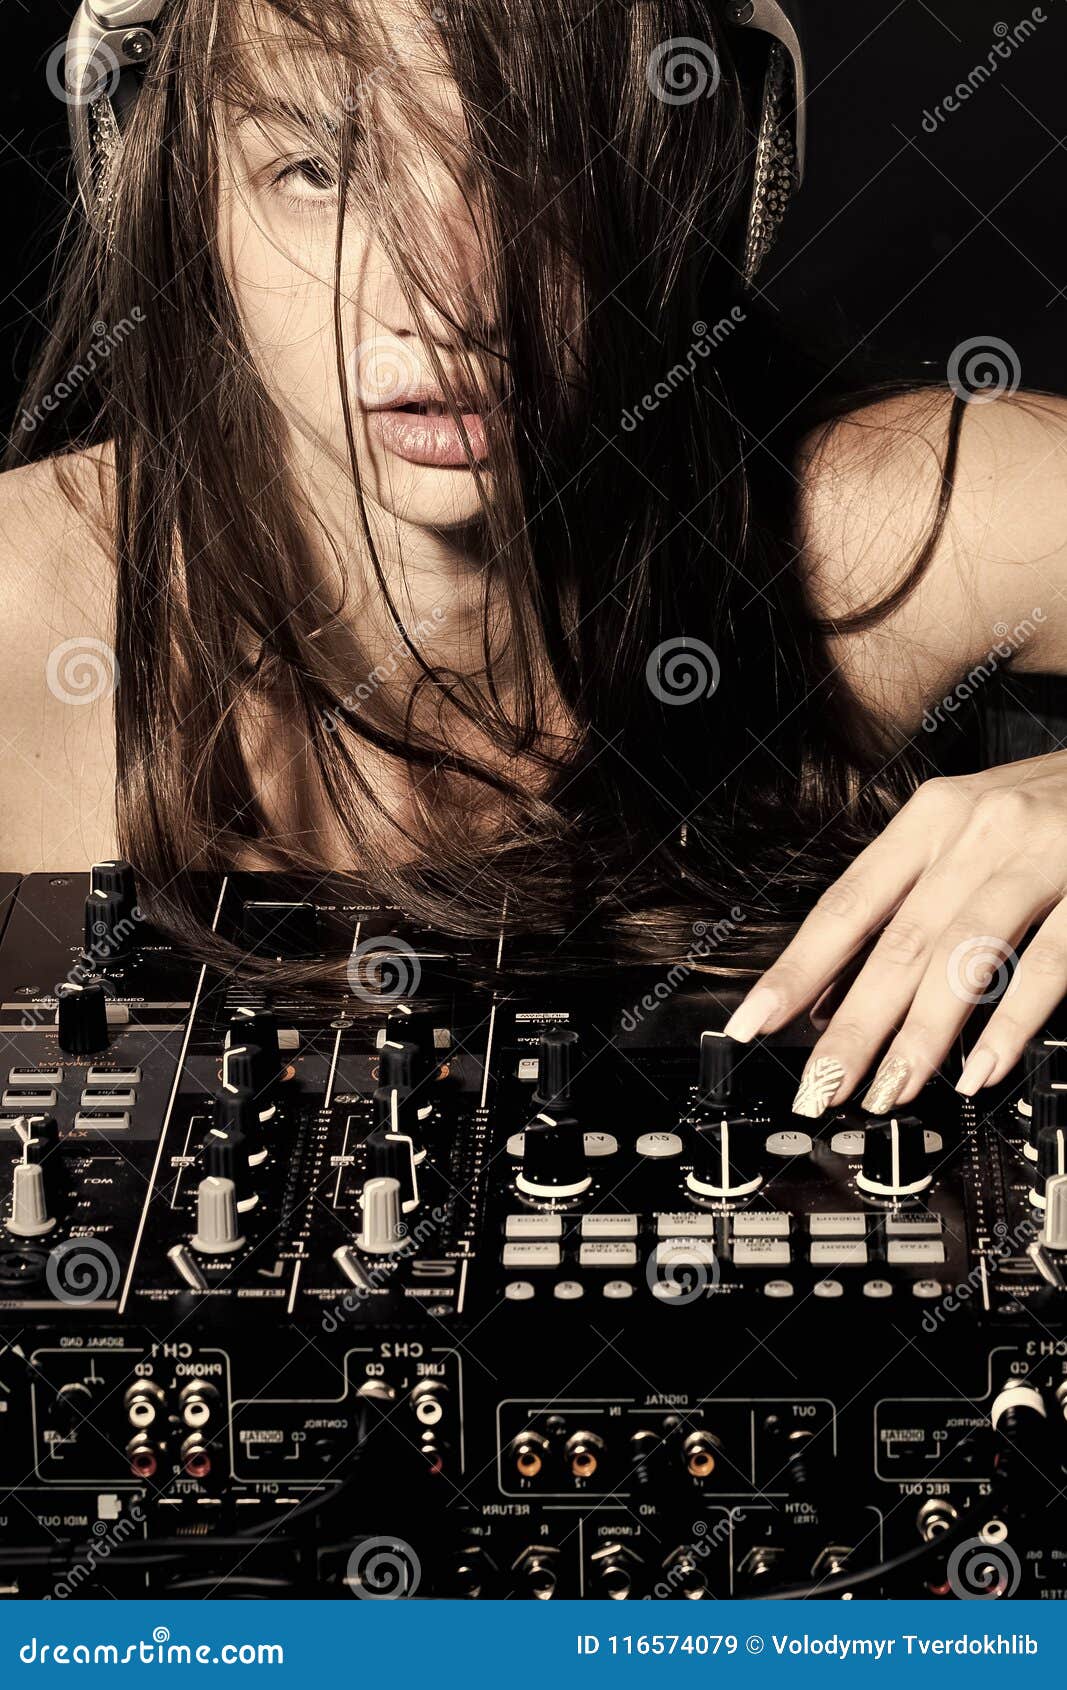 naked girl with dj equipment xxx tube picture